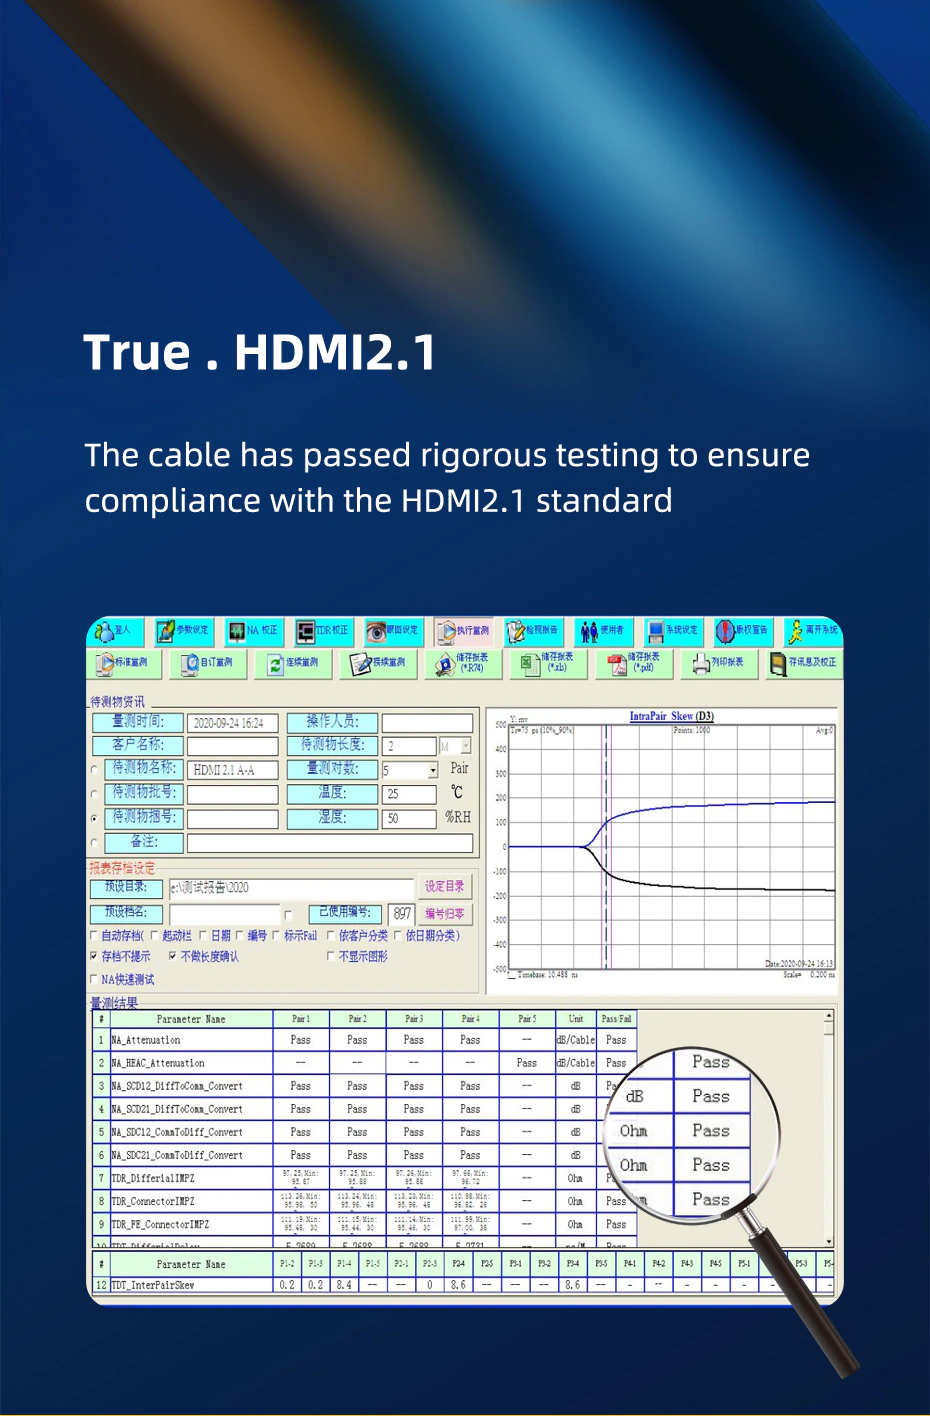 True . HDM12.1 The cable has passed rigorous testing to ensure compliance with the HDM12.1 standard